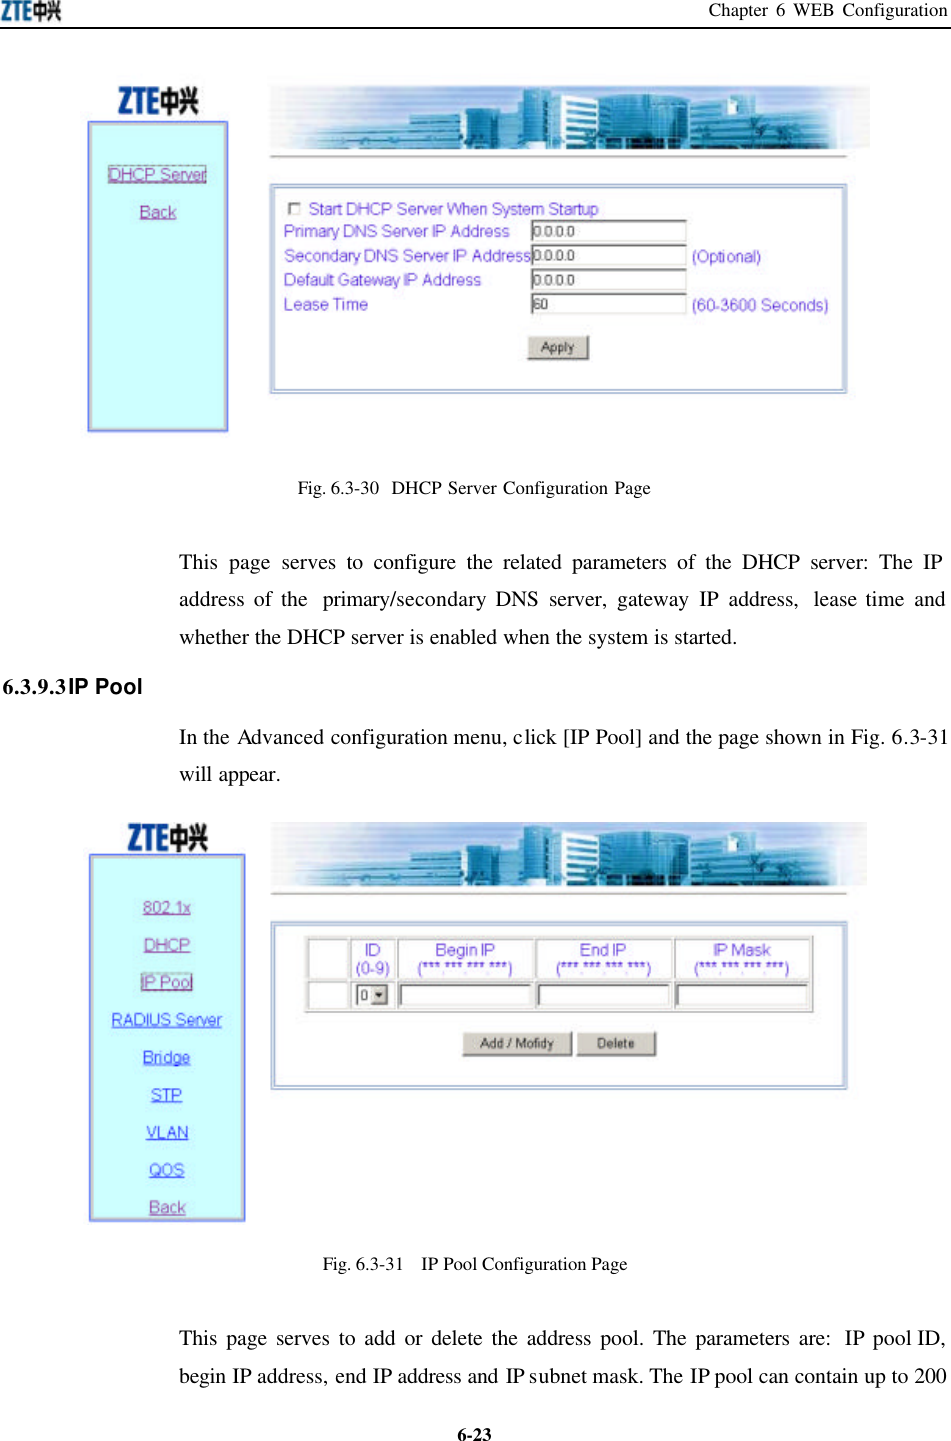 Chapter 6 WEB Configuration  6-23 Fig. 6.3-30  DHCP Server Configuration Page  This page serves to configure the related parameters of the DHCP server: The IP address of the  primary/secondary DNS server, gateway IP address,  lease time and whether the DHCP server is enabled when the system is started.   6.3.9.3 IP Pool   In the Advanced configuration menu, click [IP Pool] and the page shown in Fig. 6.3-31 will appear.    Fig. 6.3-31  IP Pool Configuration Page   This page serves to add or delete the address pool. The parameters are:  IP pool ID, begin IP address, end IP address and IP subnet mask. The IP pool can contain up to 200 